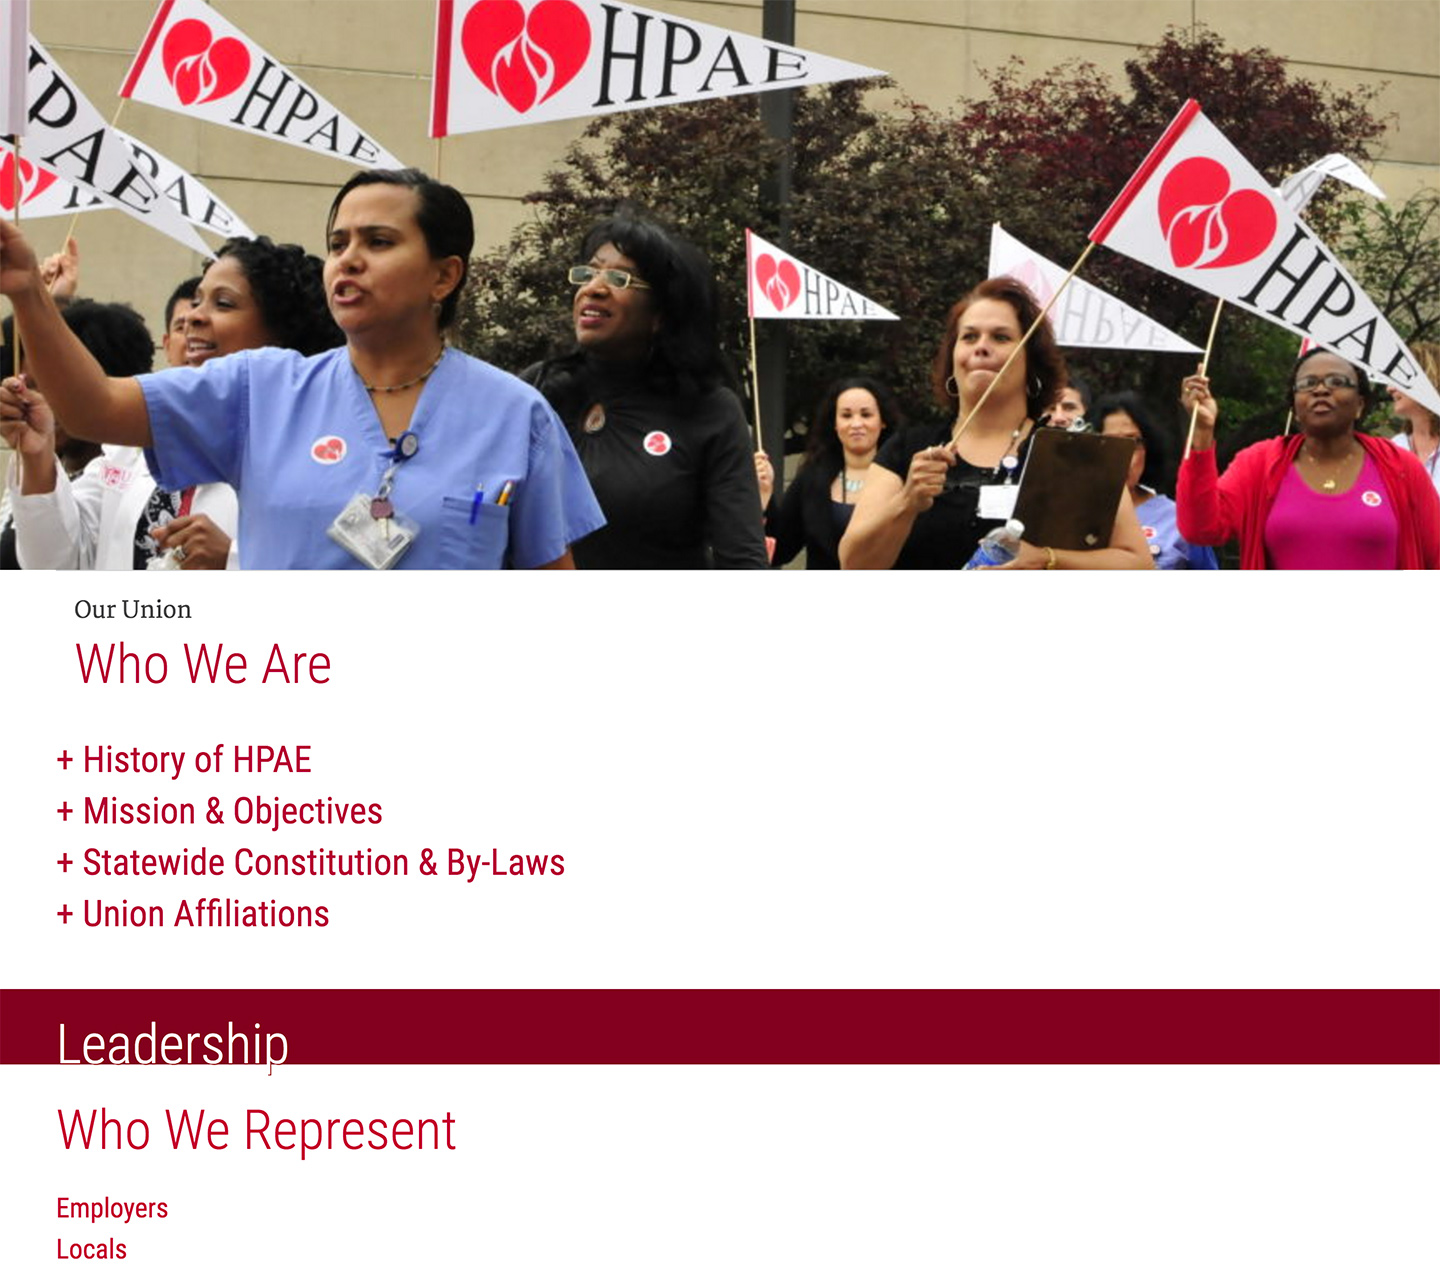 HPAE - Health Professionals and Allied Employees: Who We Are